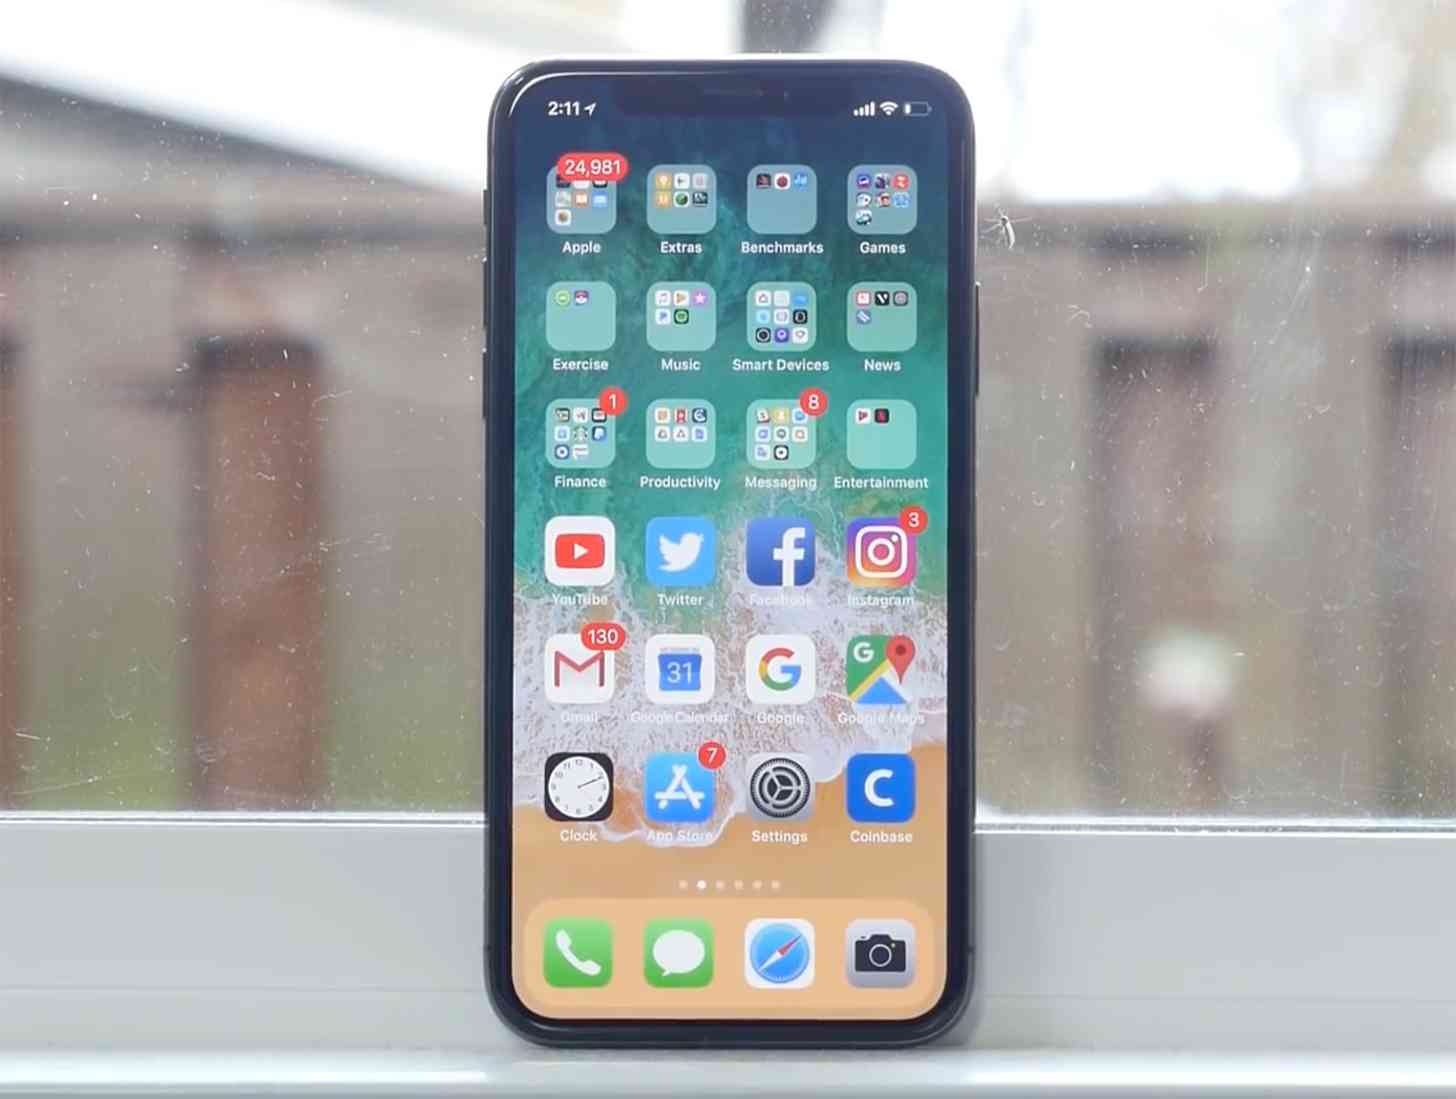 iPhone X hands-on